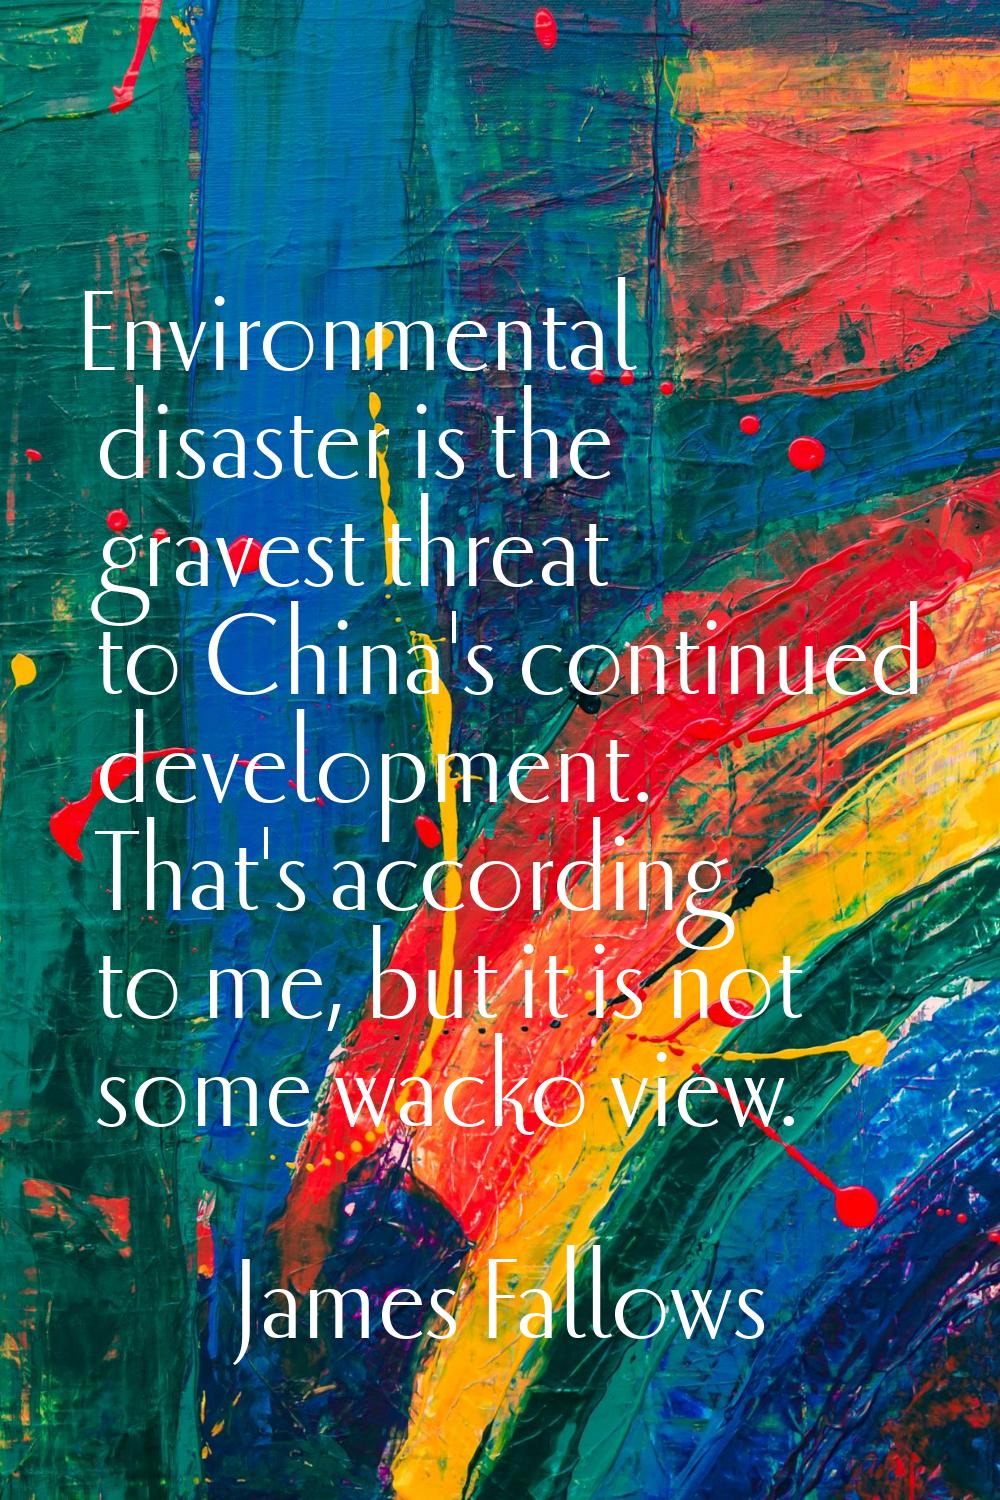 Environmental disaster is the gravest threat to China's continued development. That's according to 